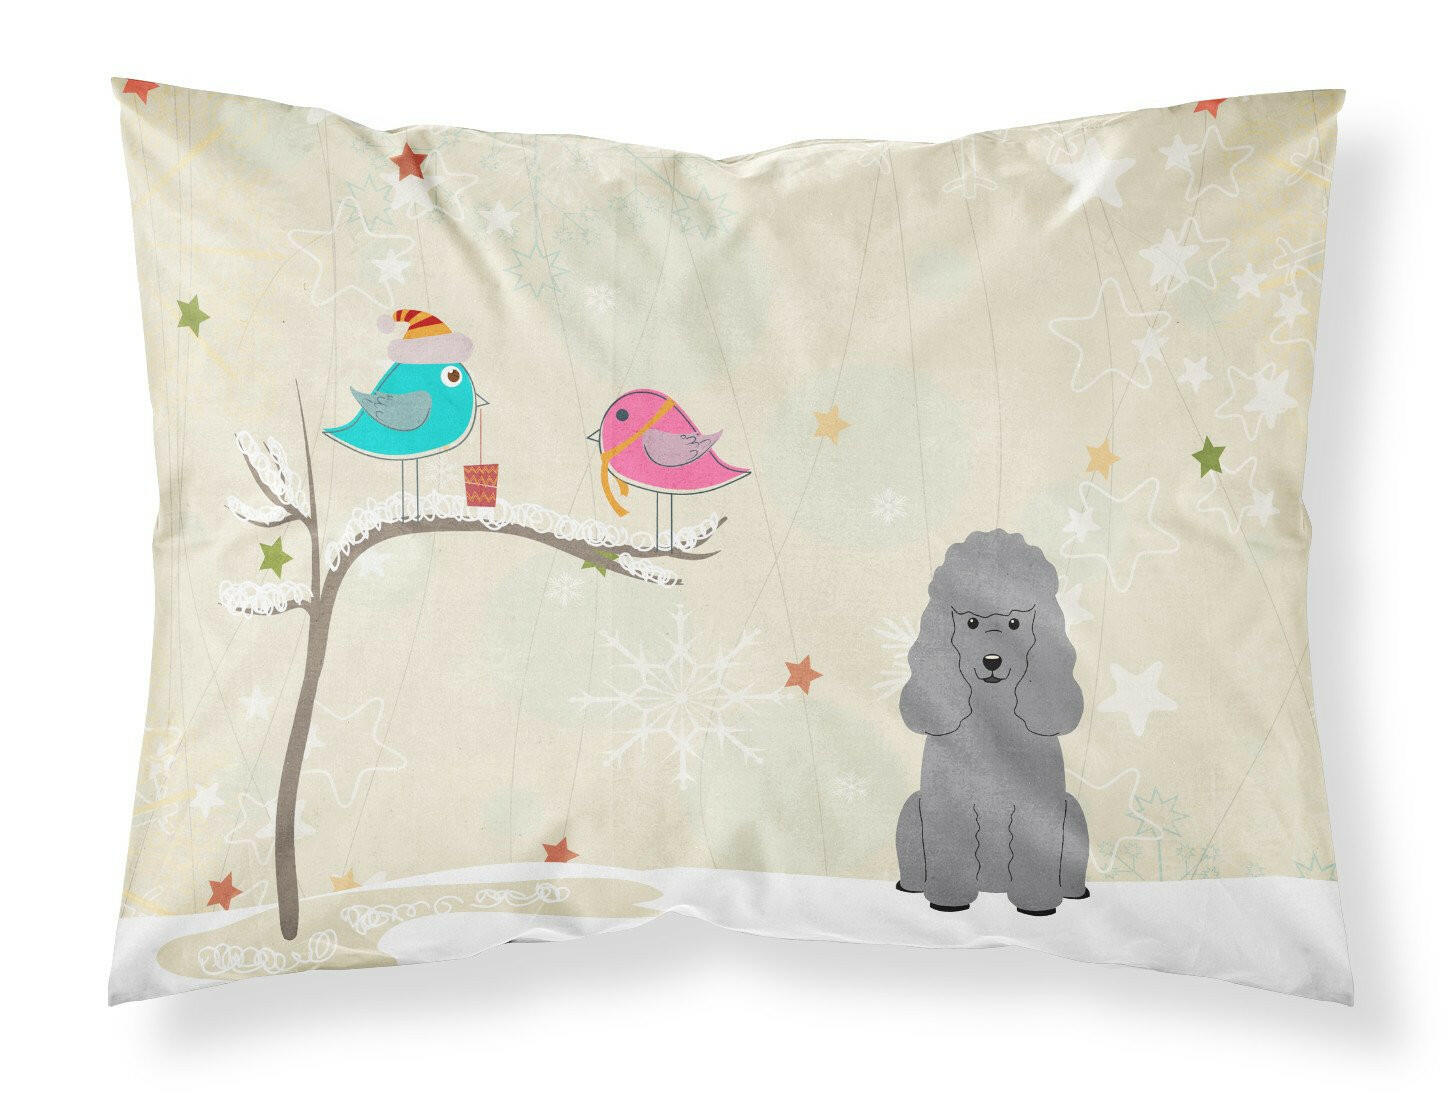 Christmas Presents between Friends Poodle Silver Fabric Standard Pillowcase BB2540PILLOWCASE by Caroline's Treasures